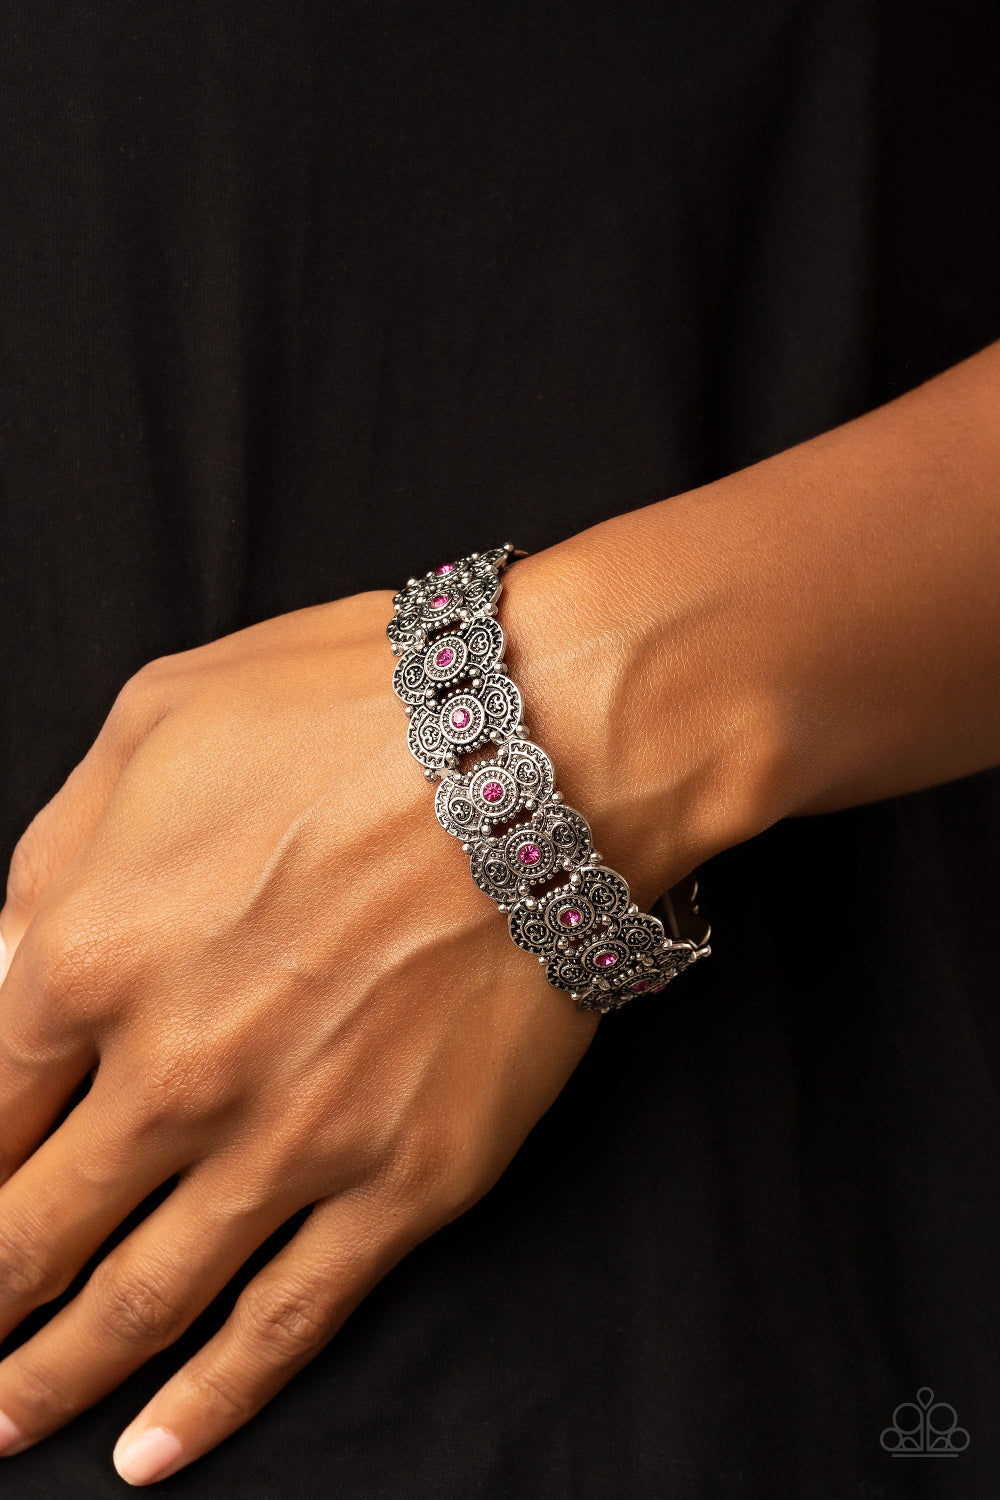 Rapturous Romance Pink Bracelet - Paparazzi Accessories  Dotted with sparkly pink rhinestones, pairs of studded and heart embossed patterned silver frames are threaded along stretchy bands around the wrist for a romantic fashion.  Sold as one individual bracelet.